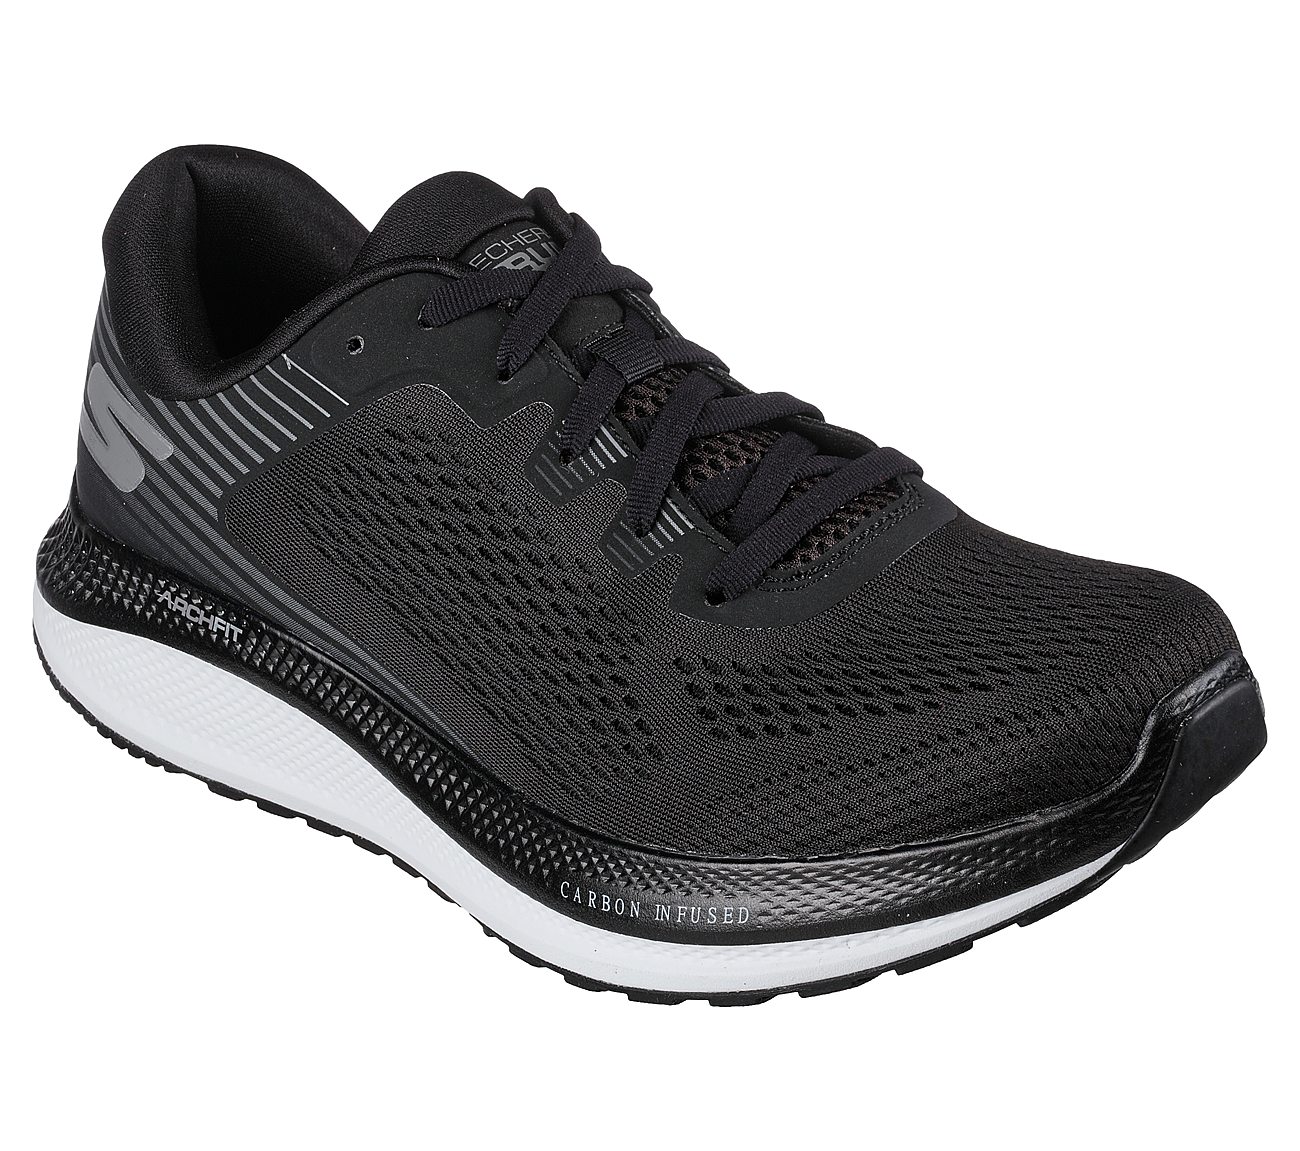 GO RUN PERSISTENCE  ,  Footwear Lateral View